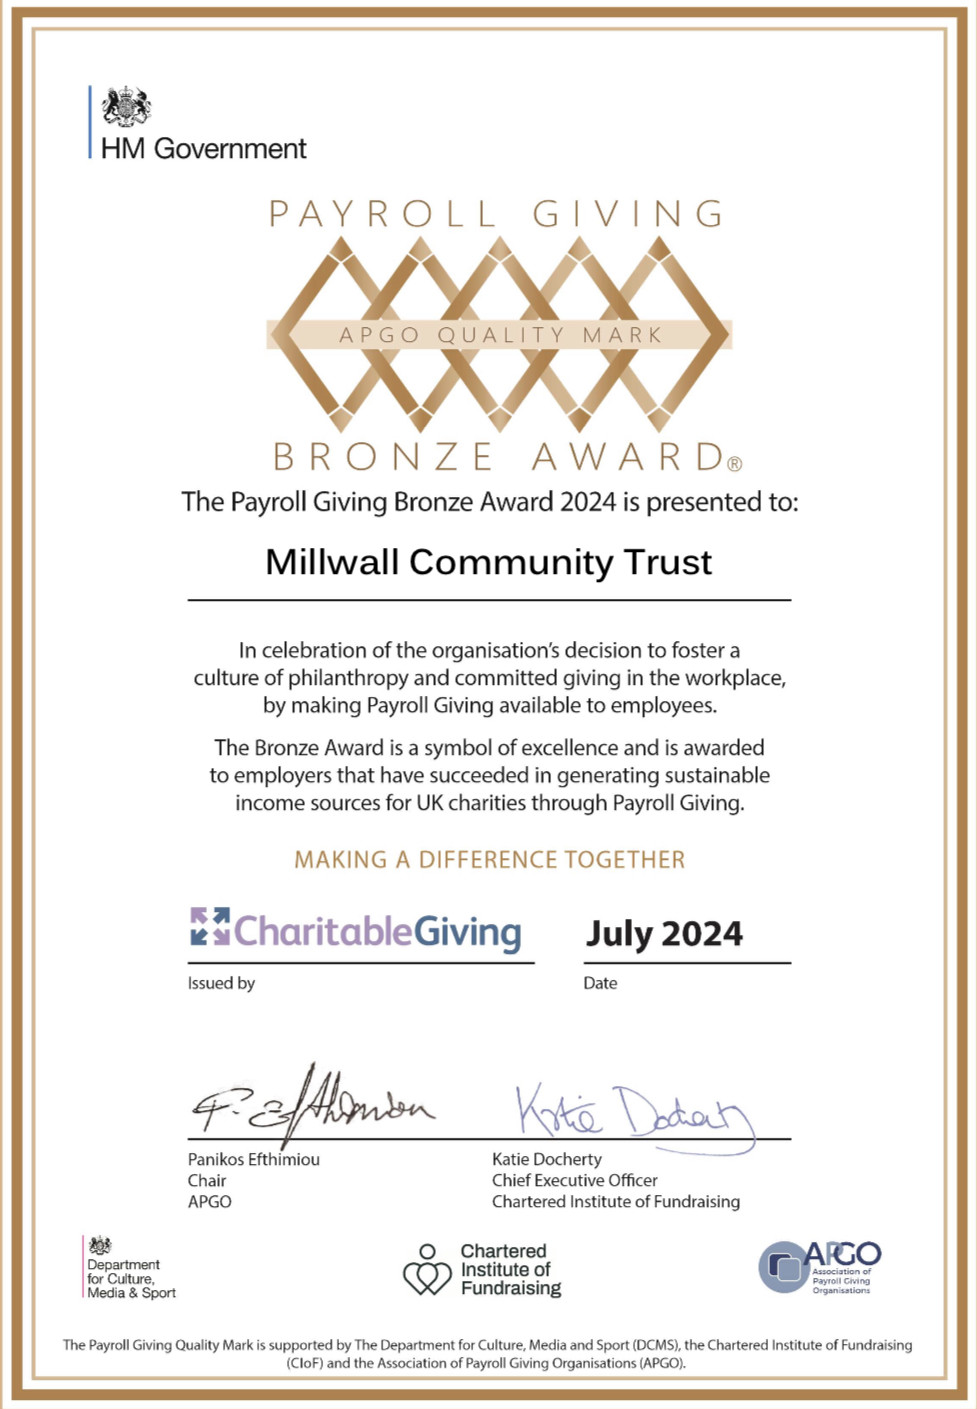 Millwall Community Trust have been awarded a Payroll Giving AGPO Quality Mark for 2024